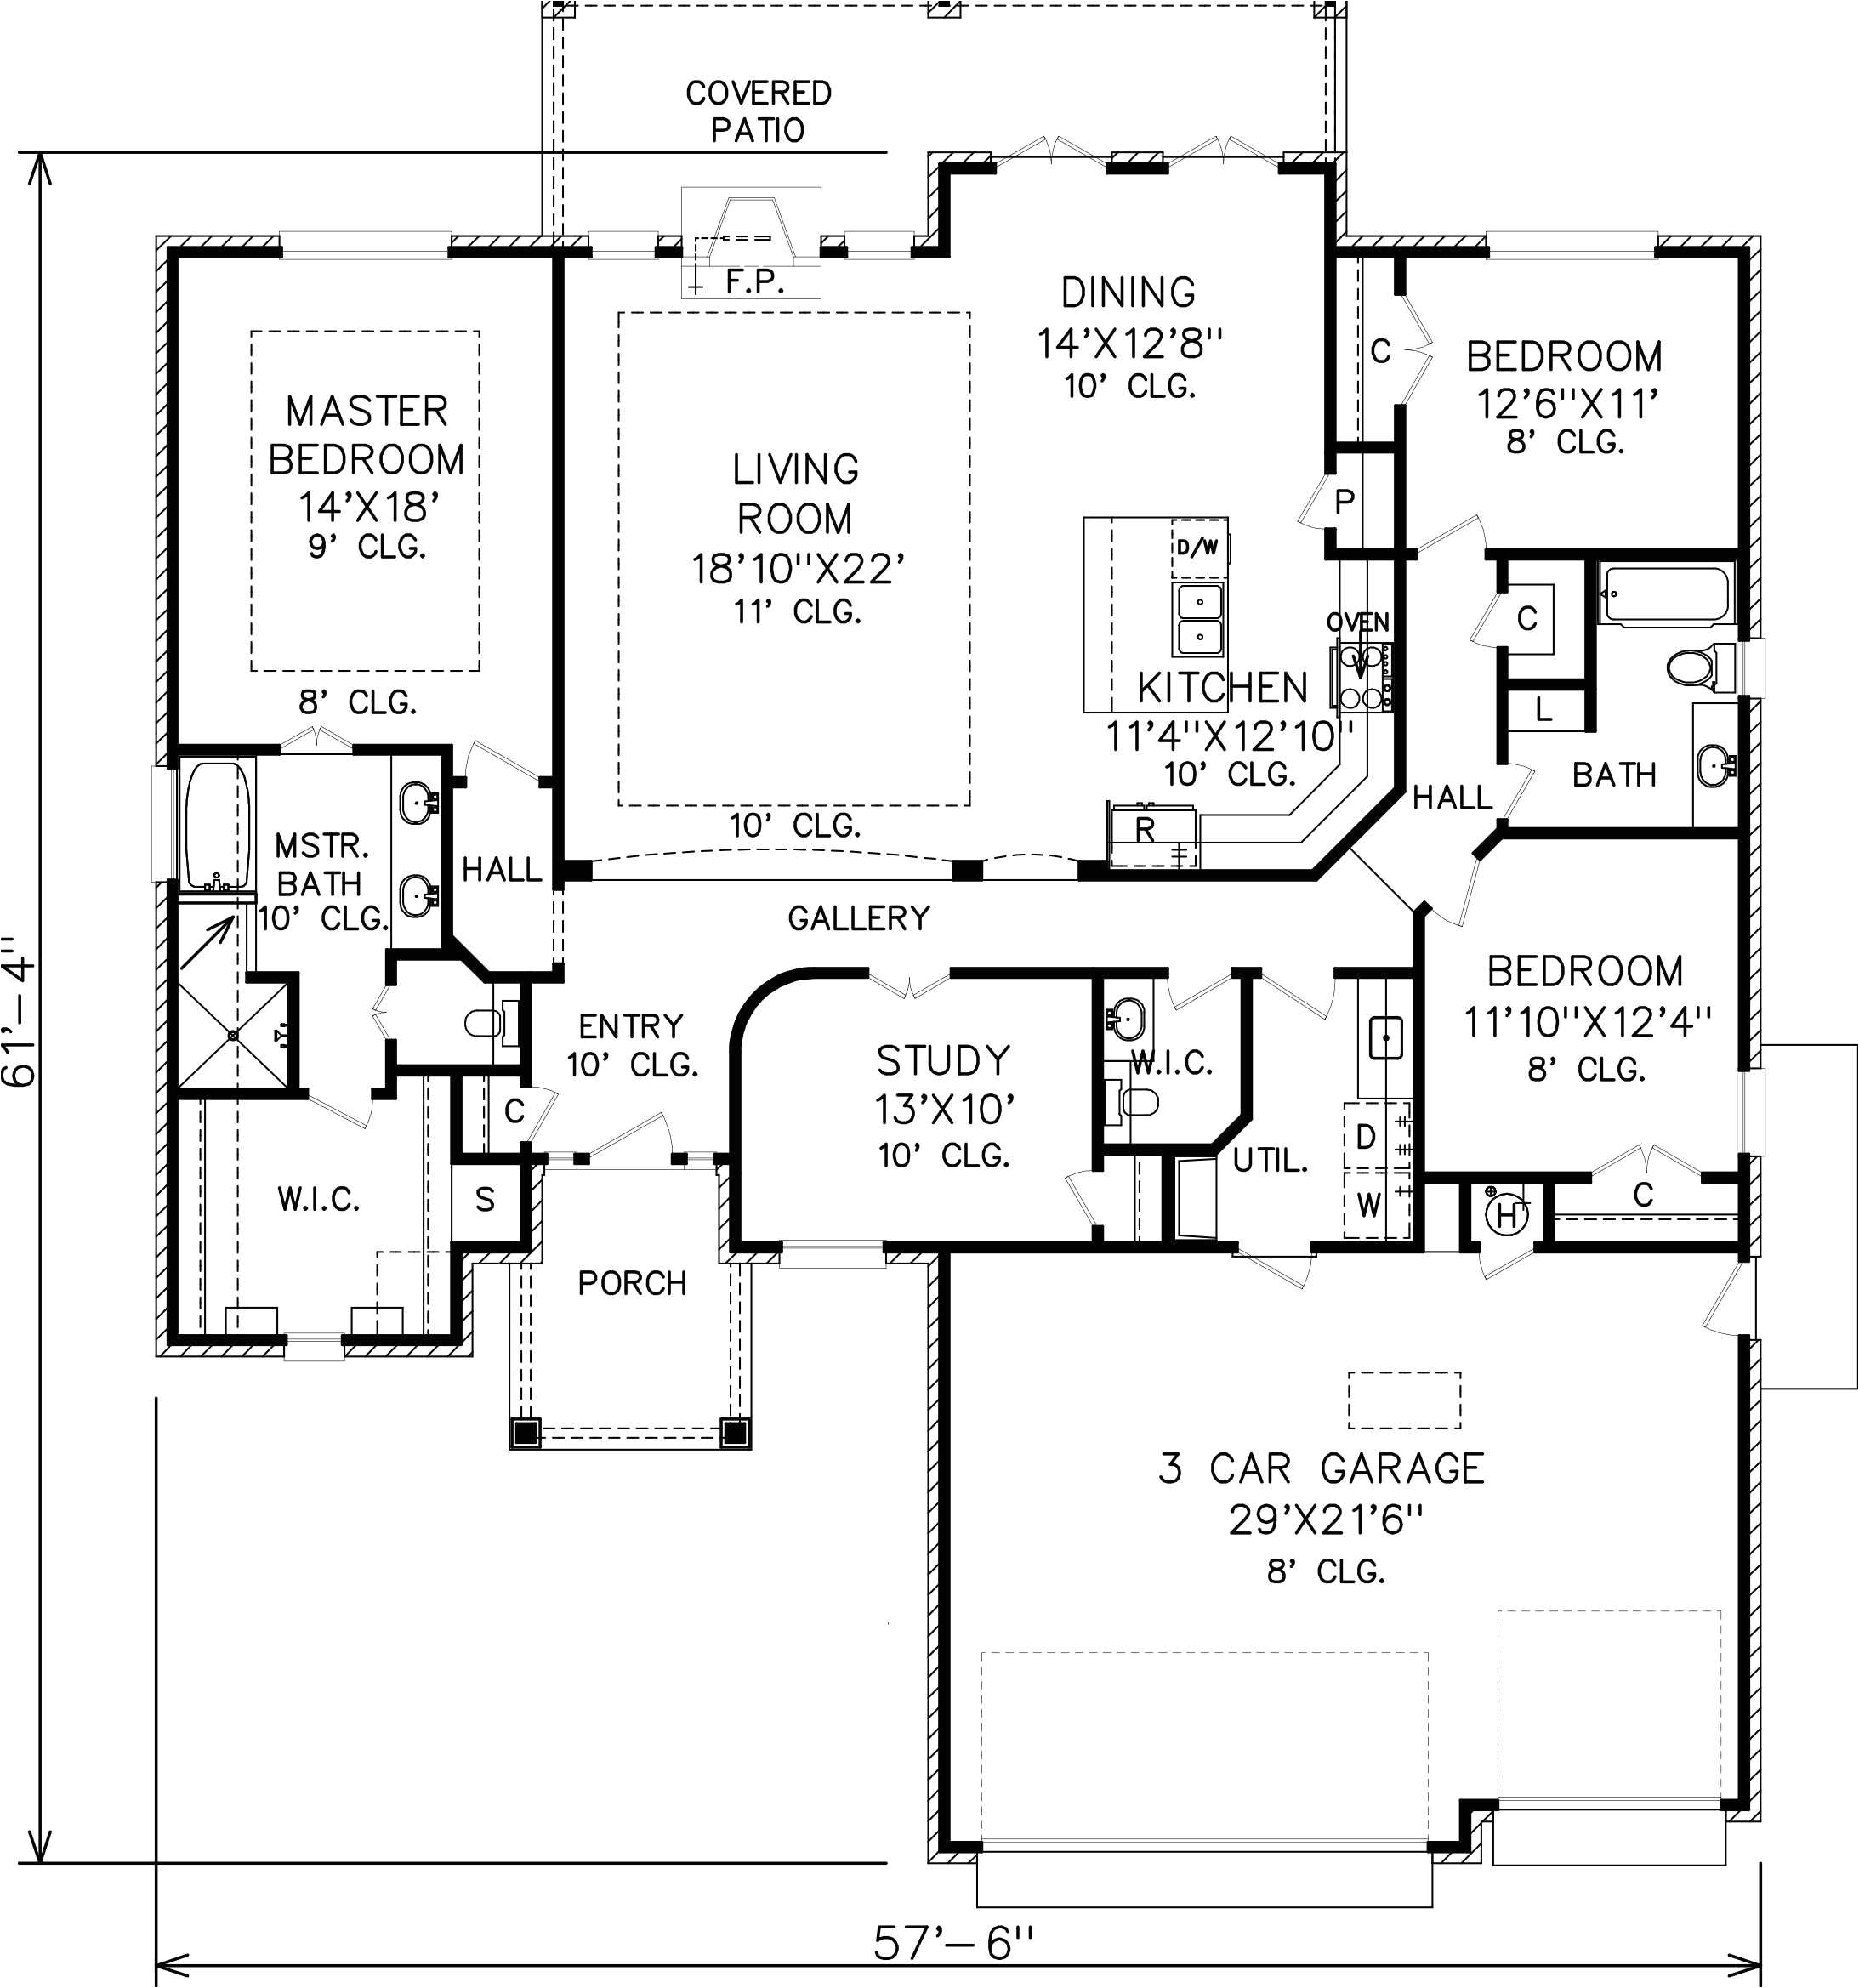 20 x 40 house plans inspirational house plans with pools luxury index wiki 0 0d 3